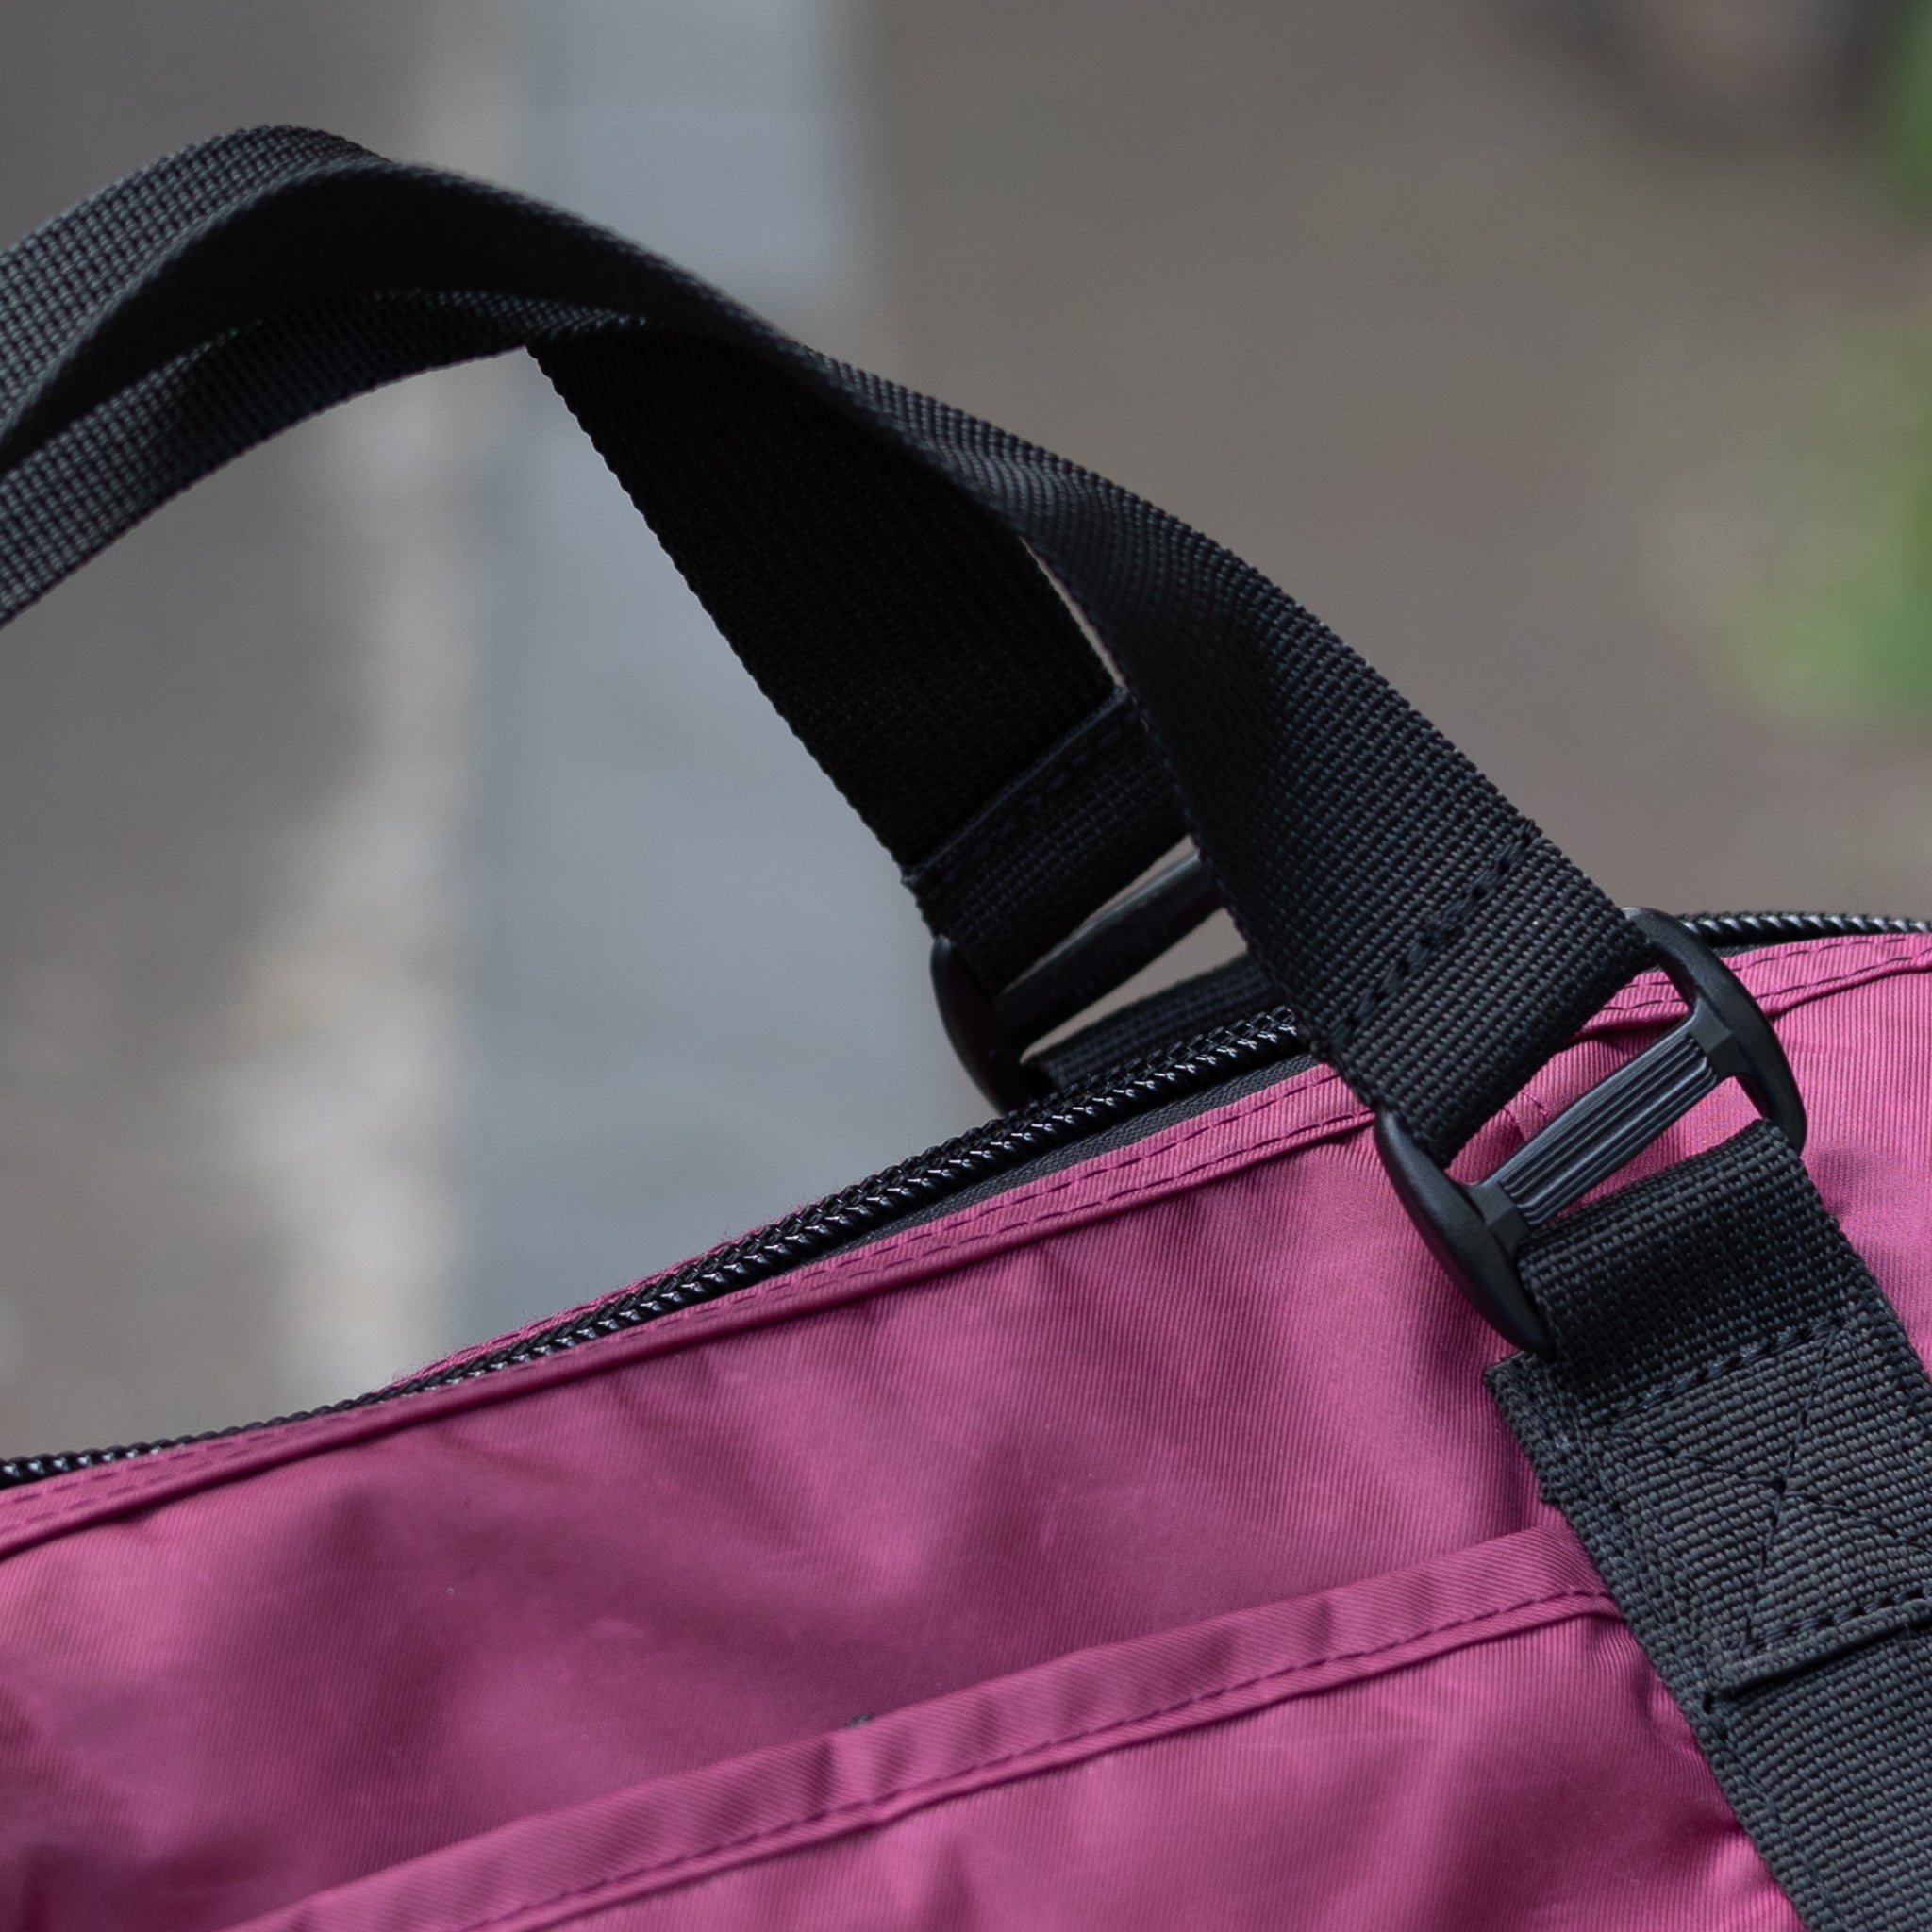 Francis Foldable Tote